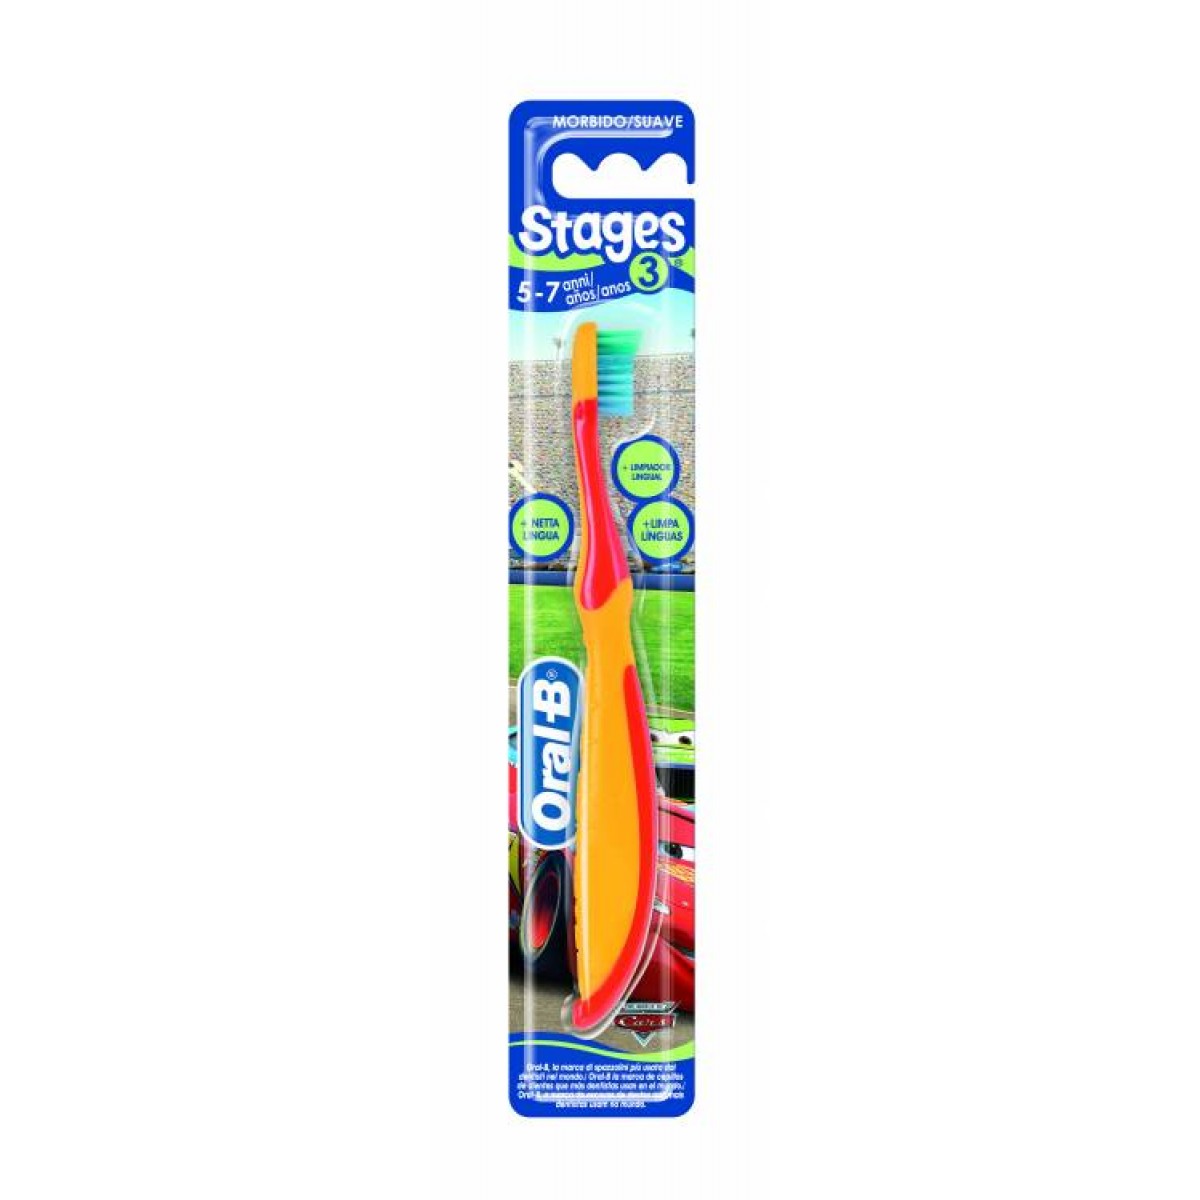 Oral-B Stages 3 Toothbrush